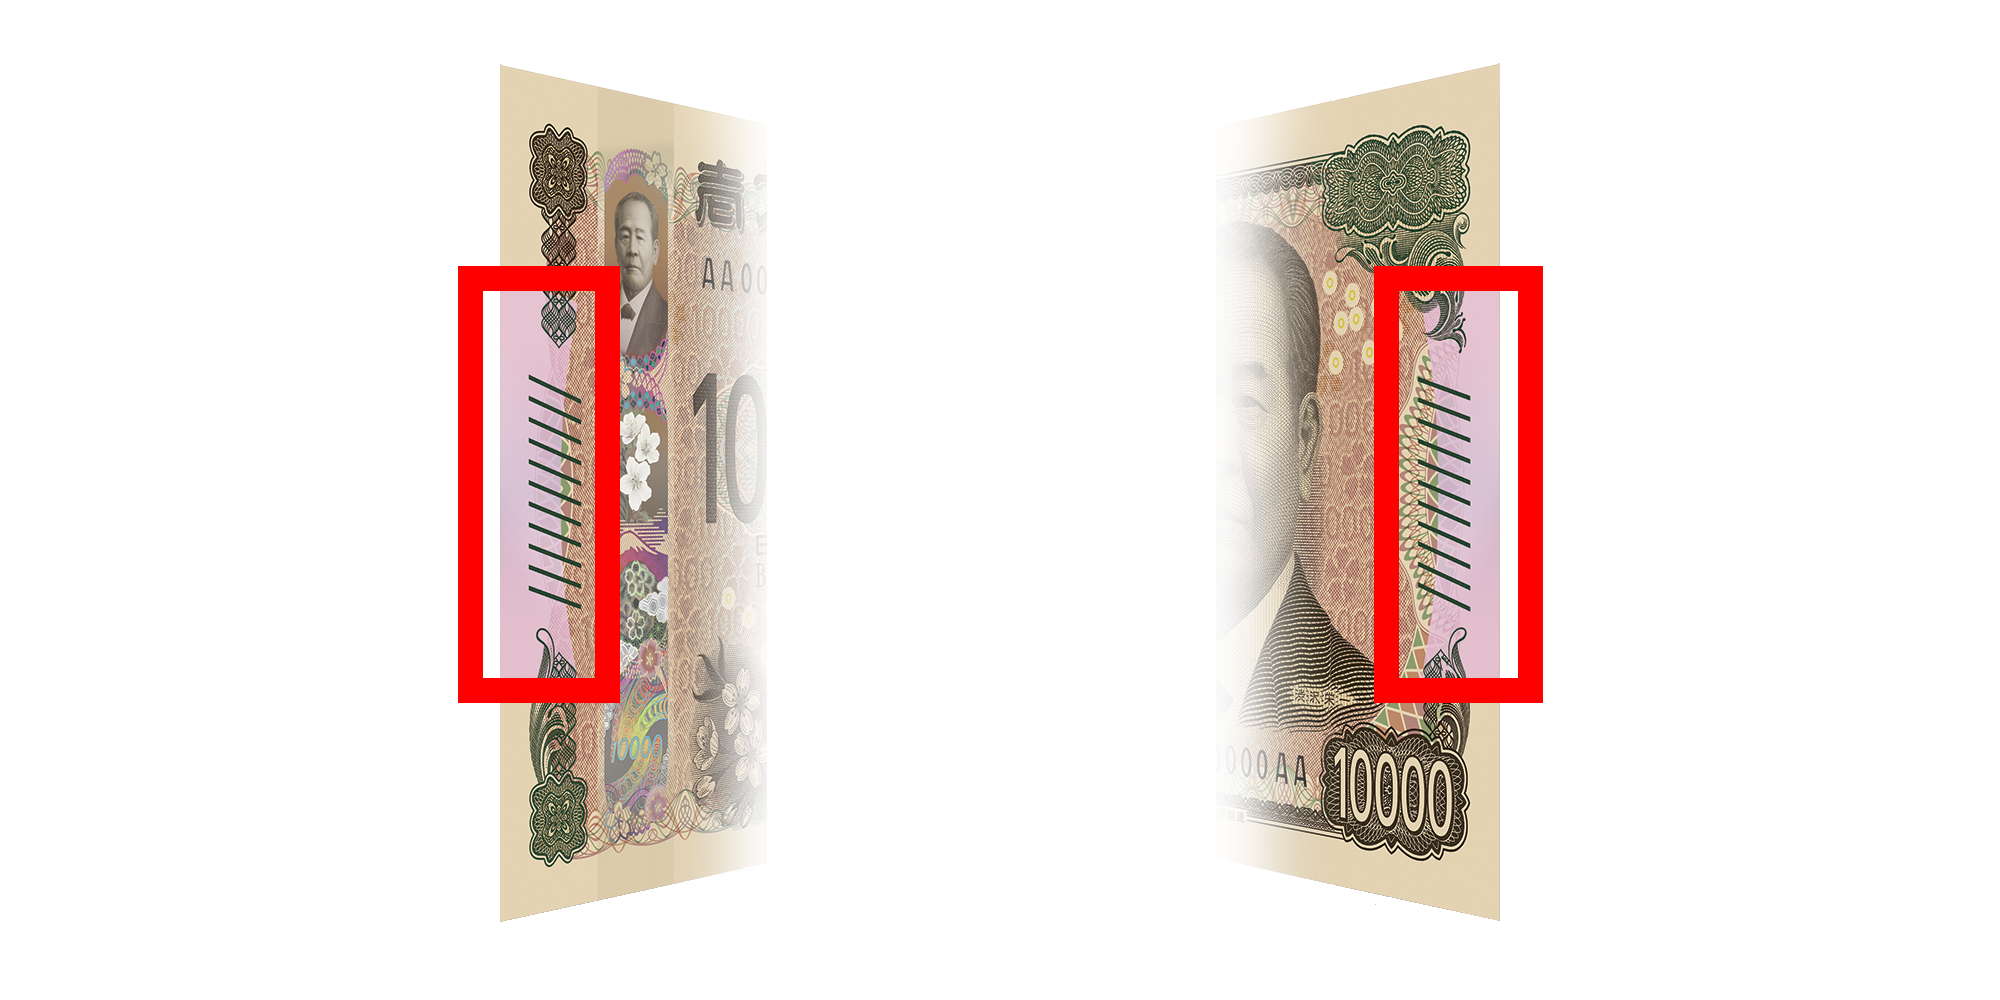 Images showing how a semi-transparent pink and pearly pattern appears when the 10,000 yen note is tilted.